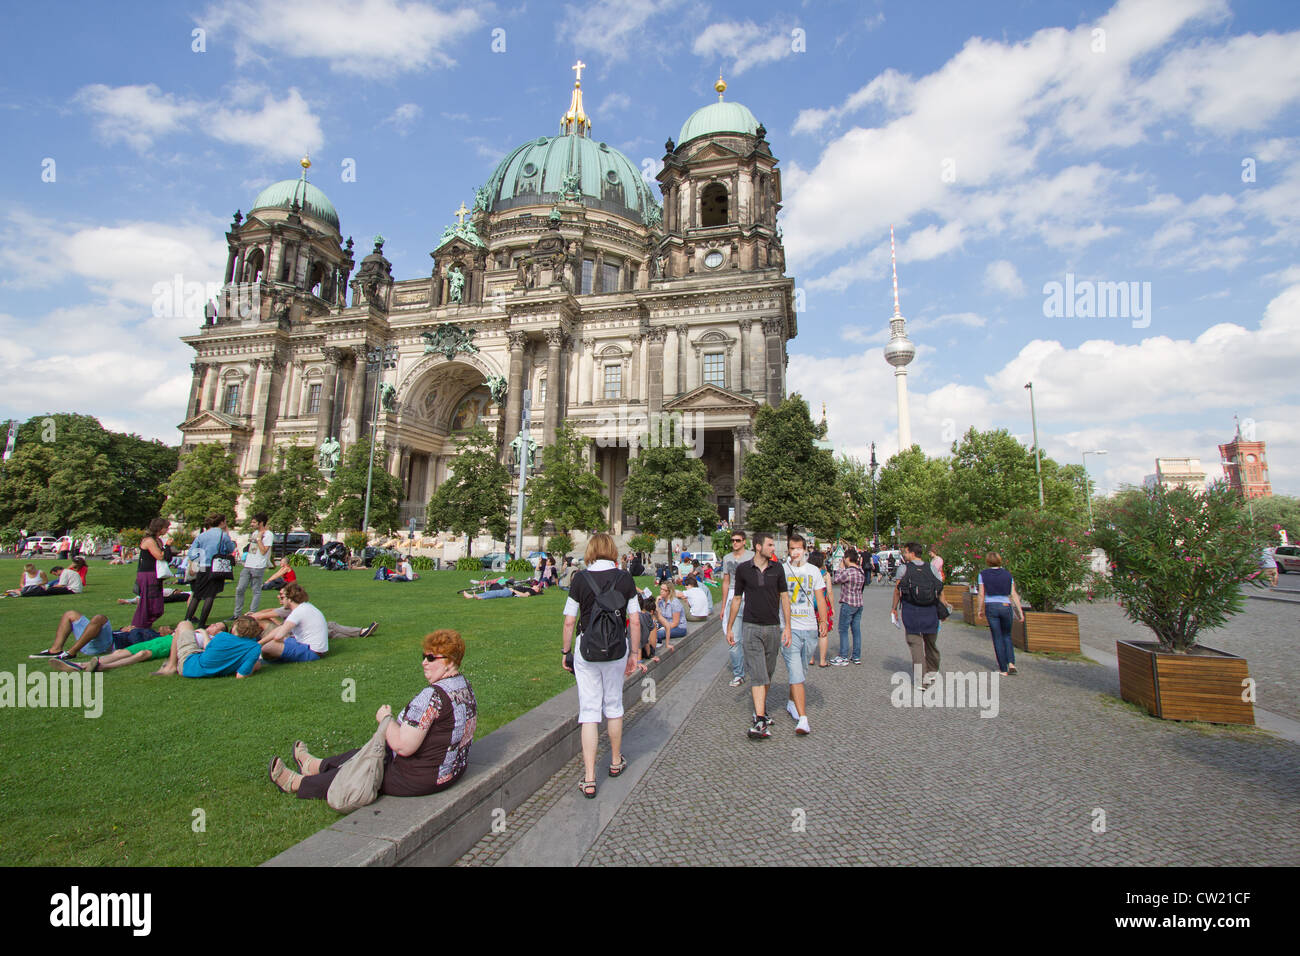 Berliner Dom,or Berlin Cathedral. It was built between 1895 and 1905. The current building replaced in 1894. Stock Photo